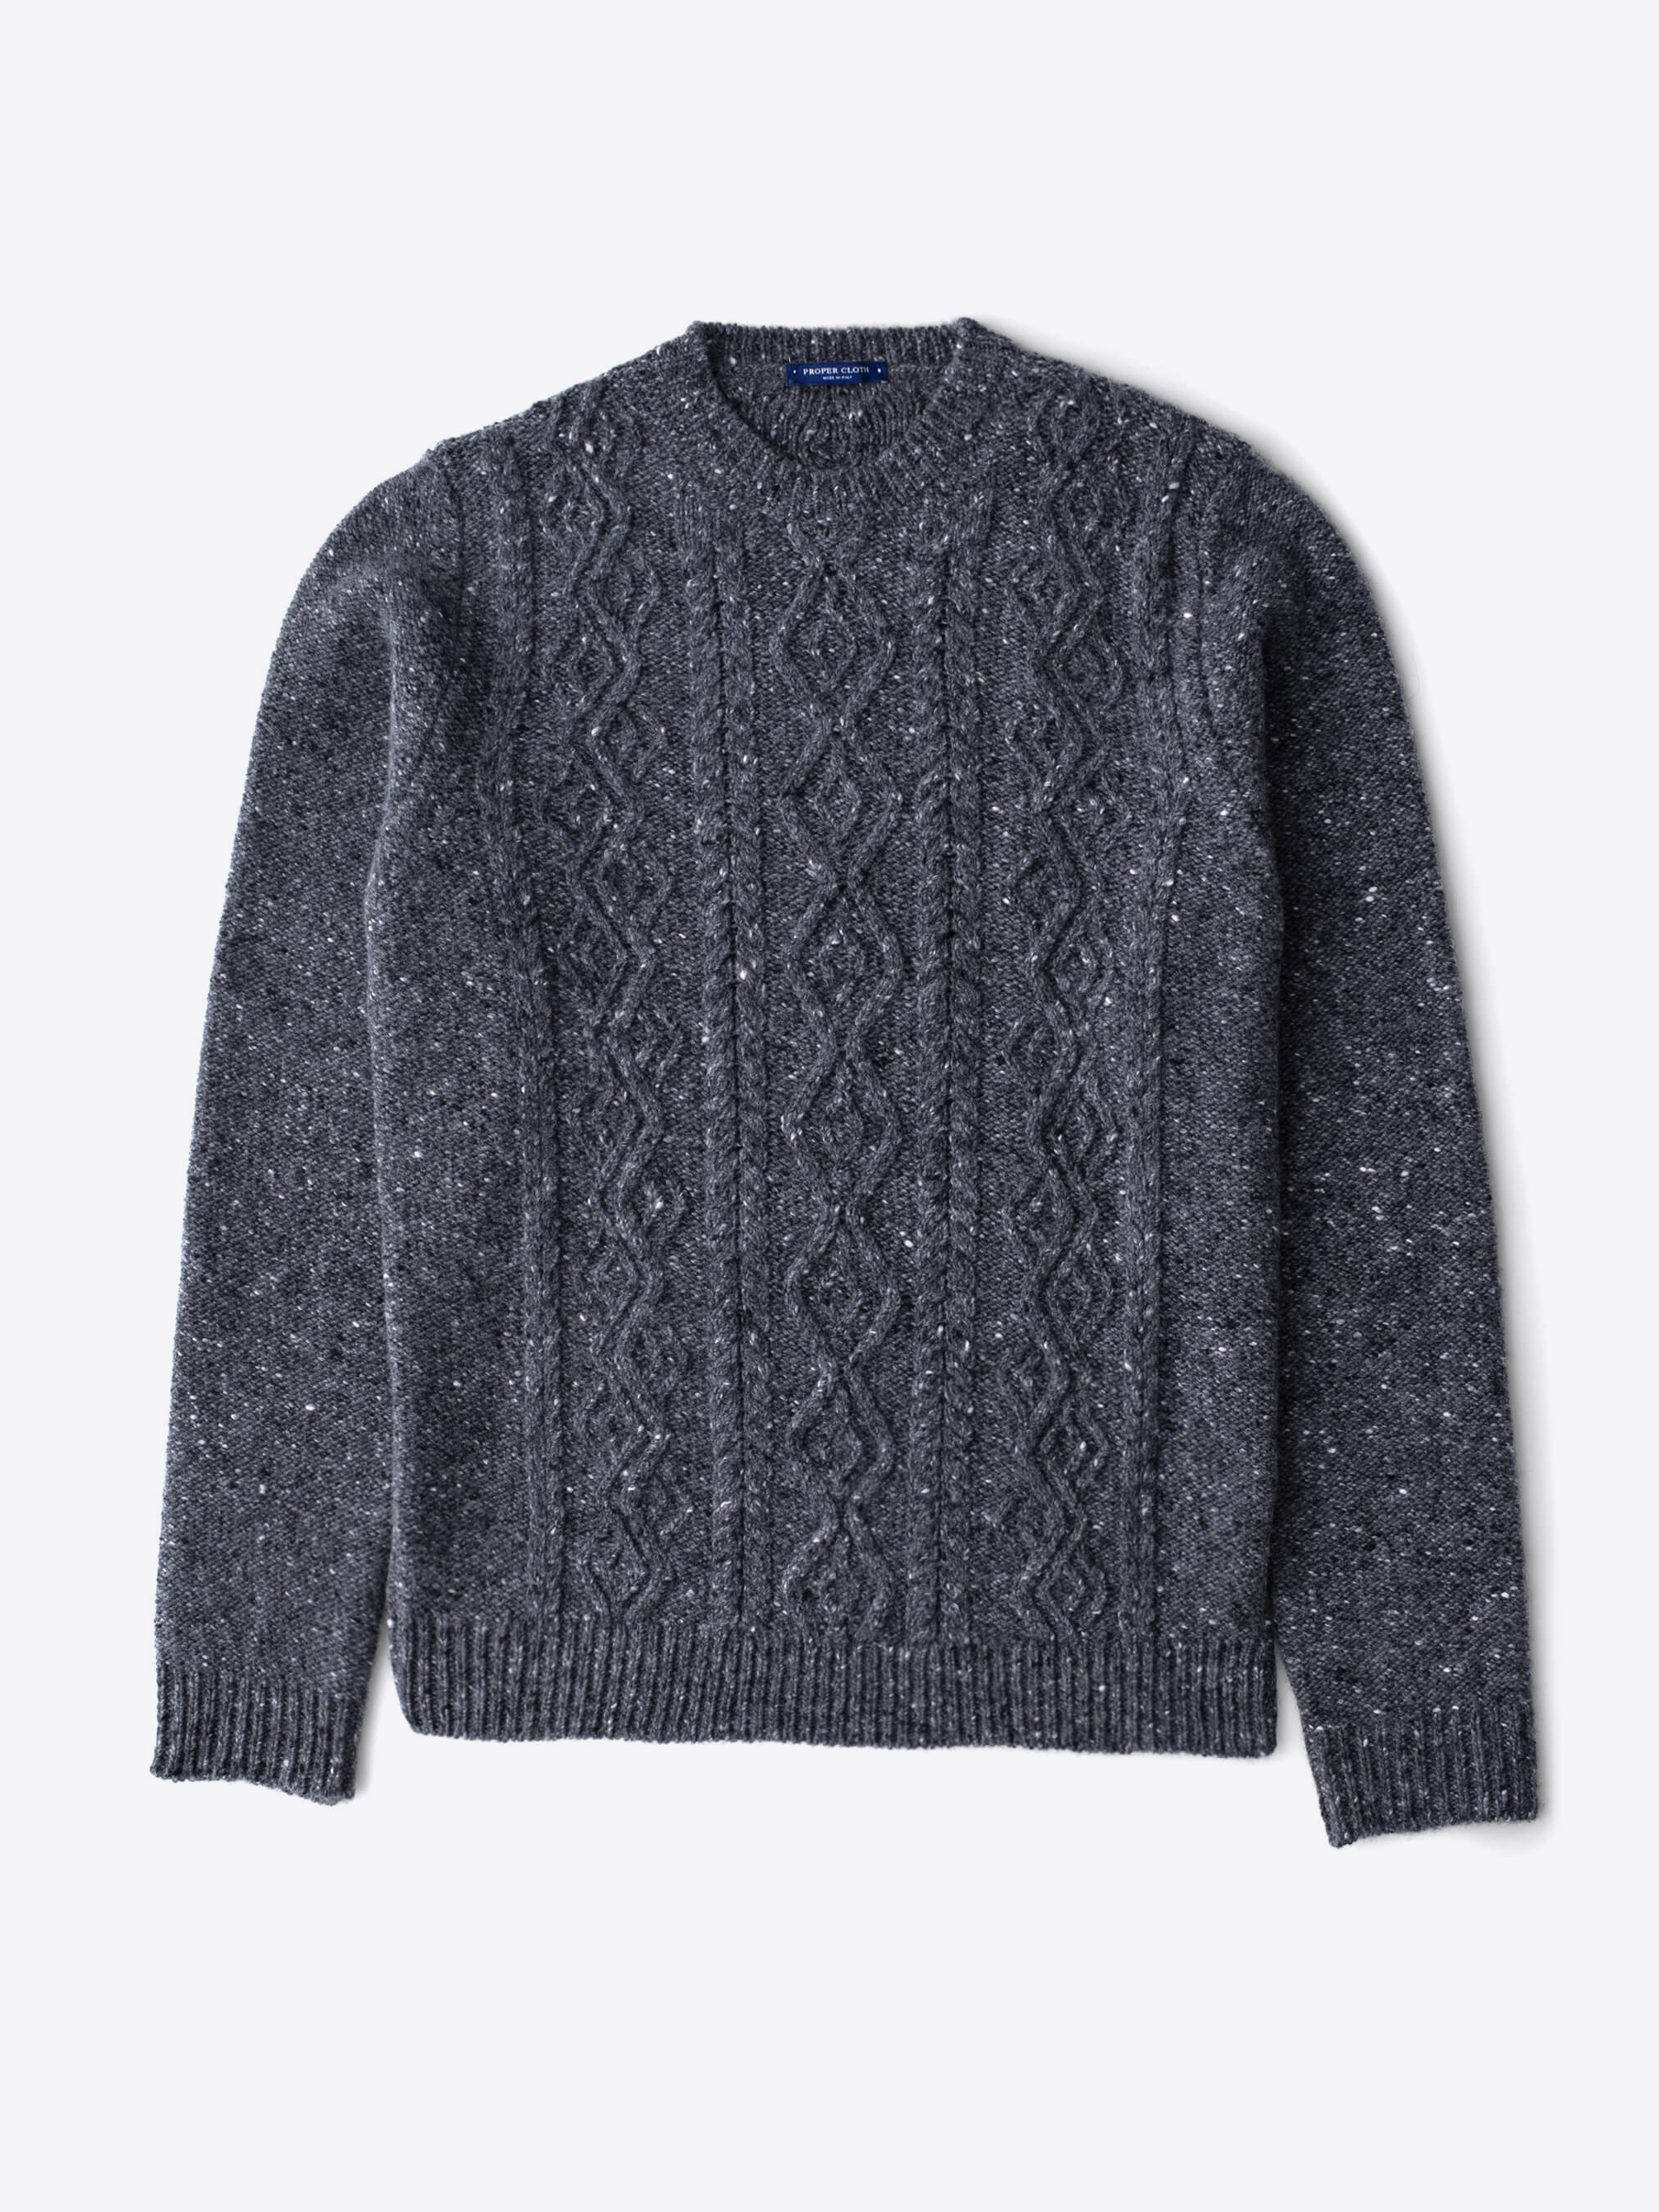 Zoom Image of Charcoal Italian Wool and Cashmere Aran Crewneck Sweater